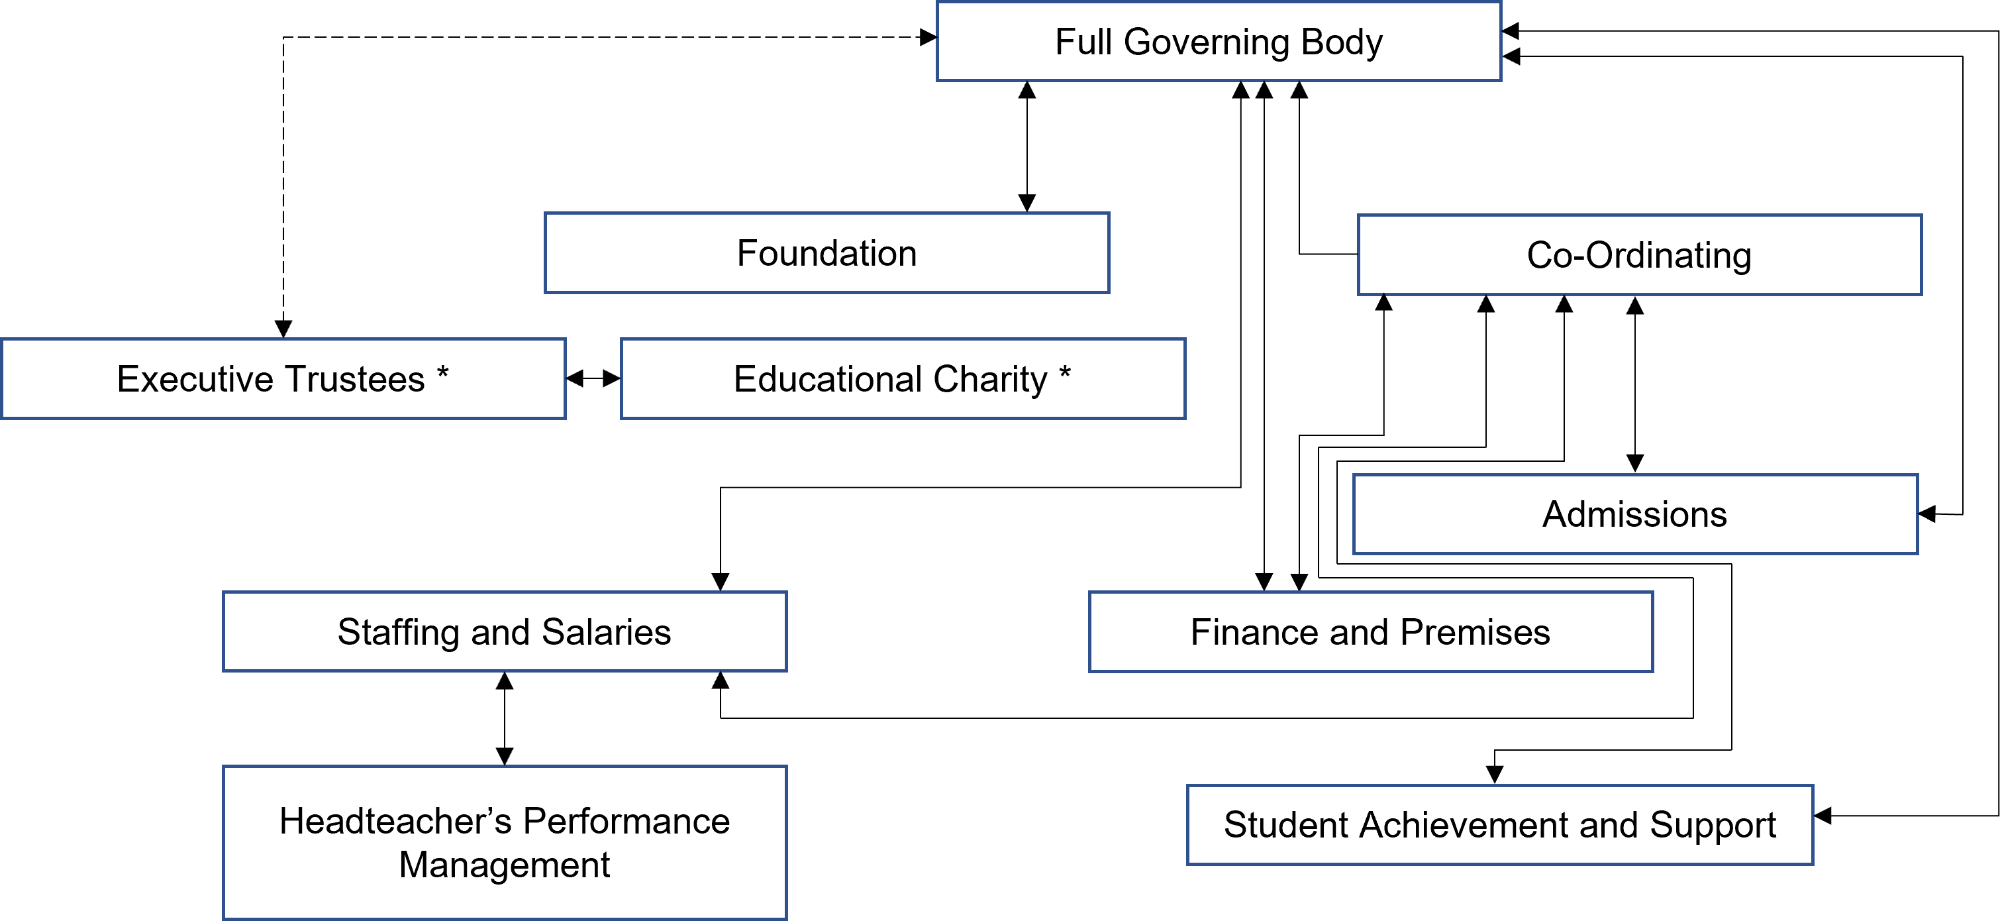 Governors structure diagram